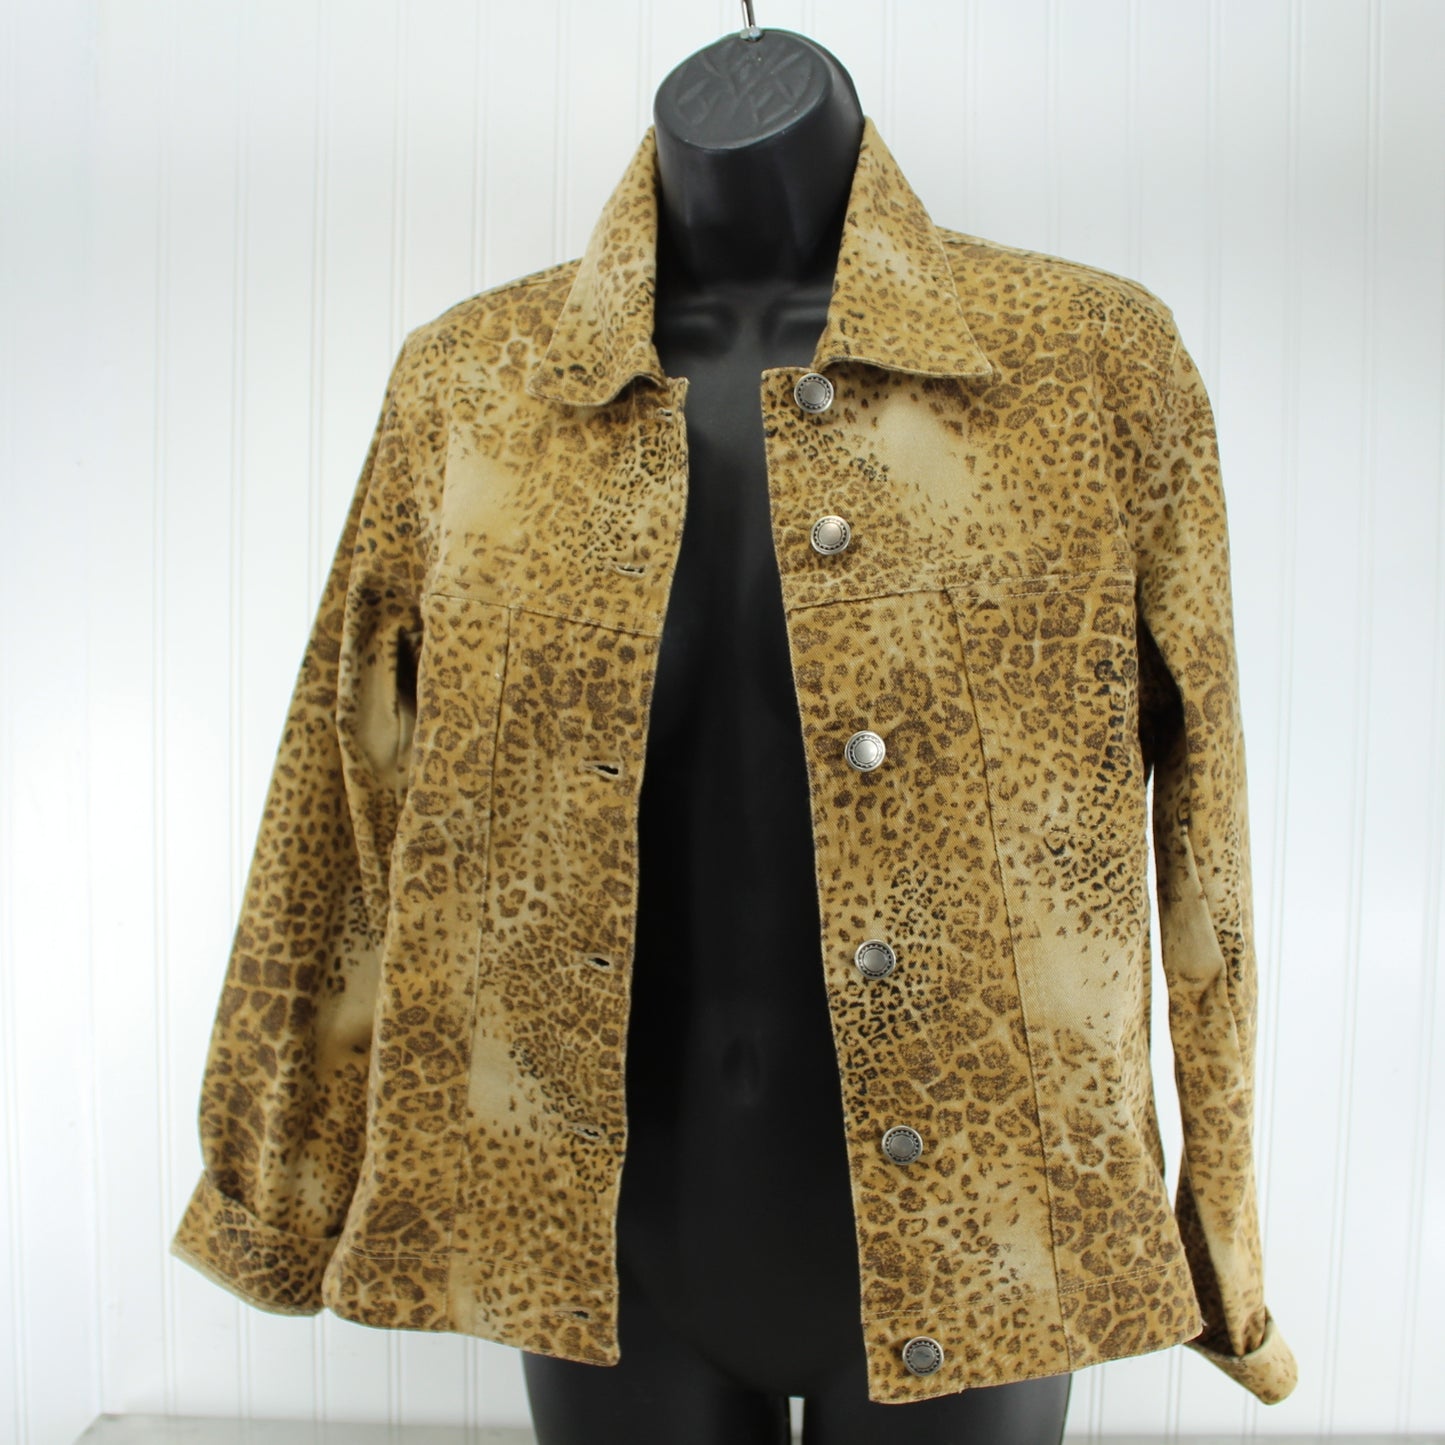 Chico's Design Leopard Print Cotton Jacket Adjustable Band Waist Chico Size 0 long sleeves metal buttons